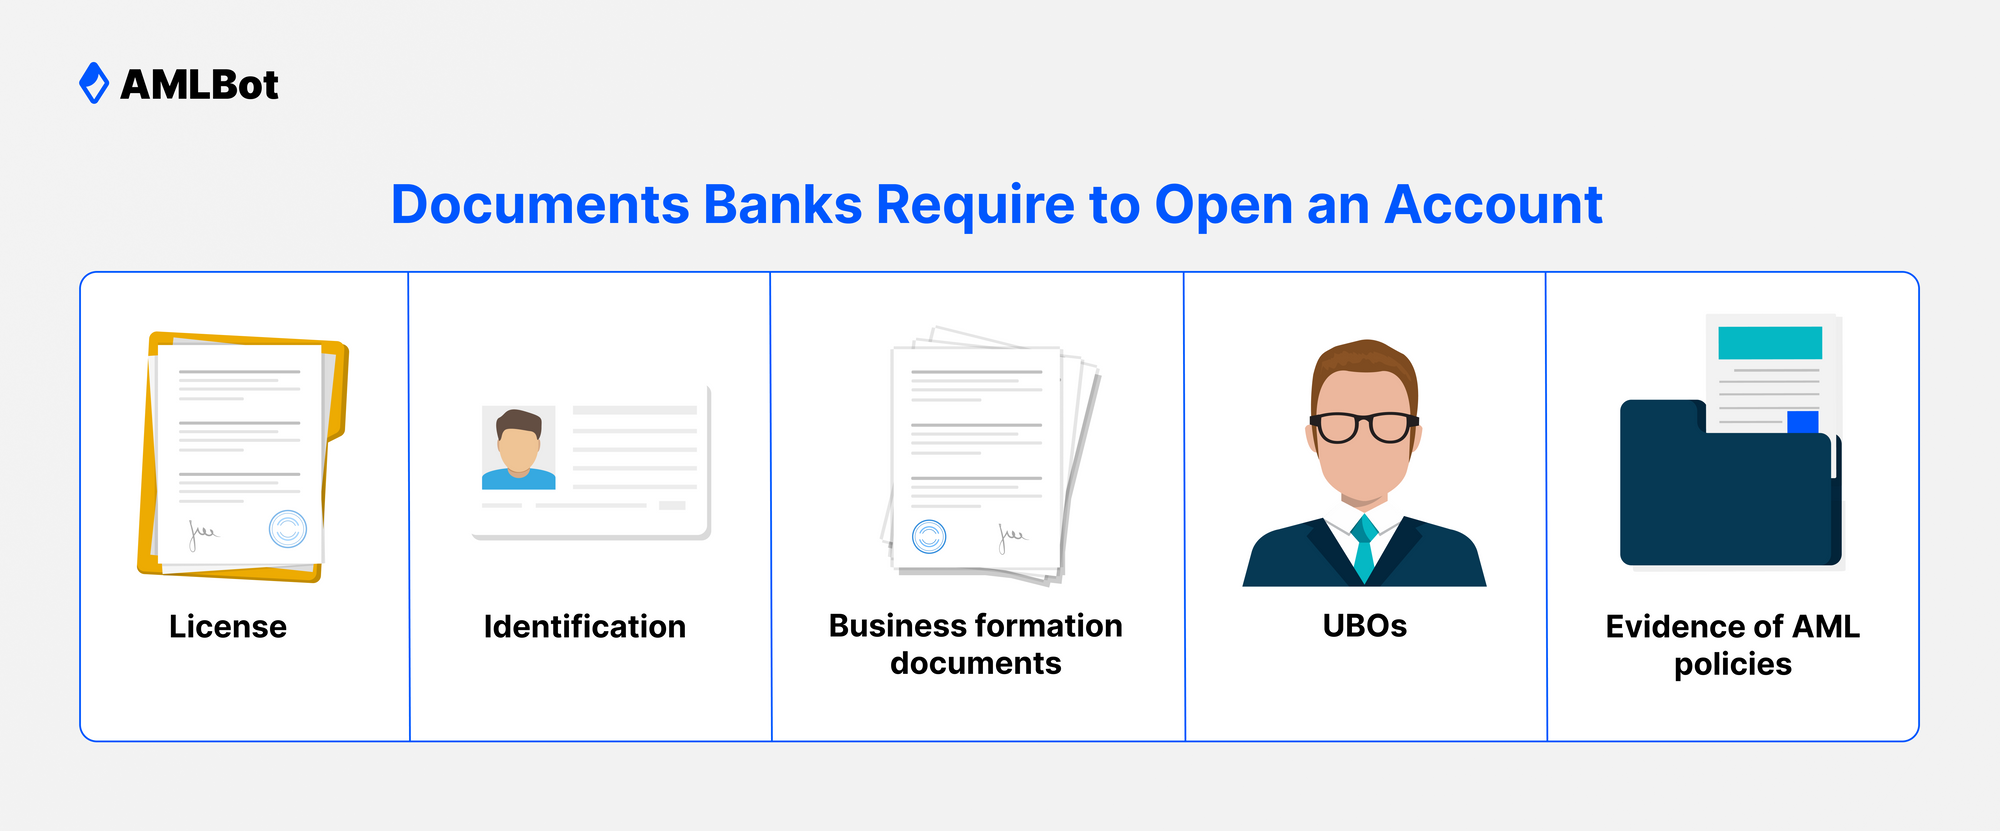 _Documents Banks Require to Open an Account